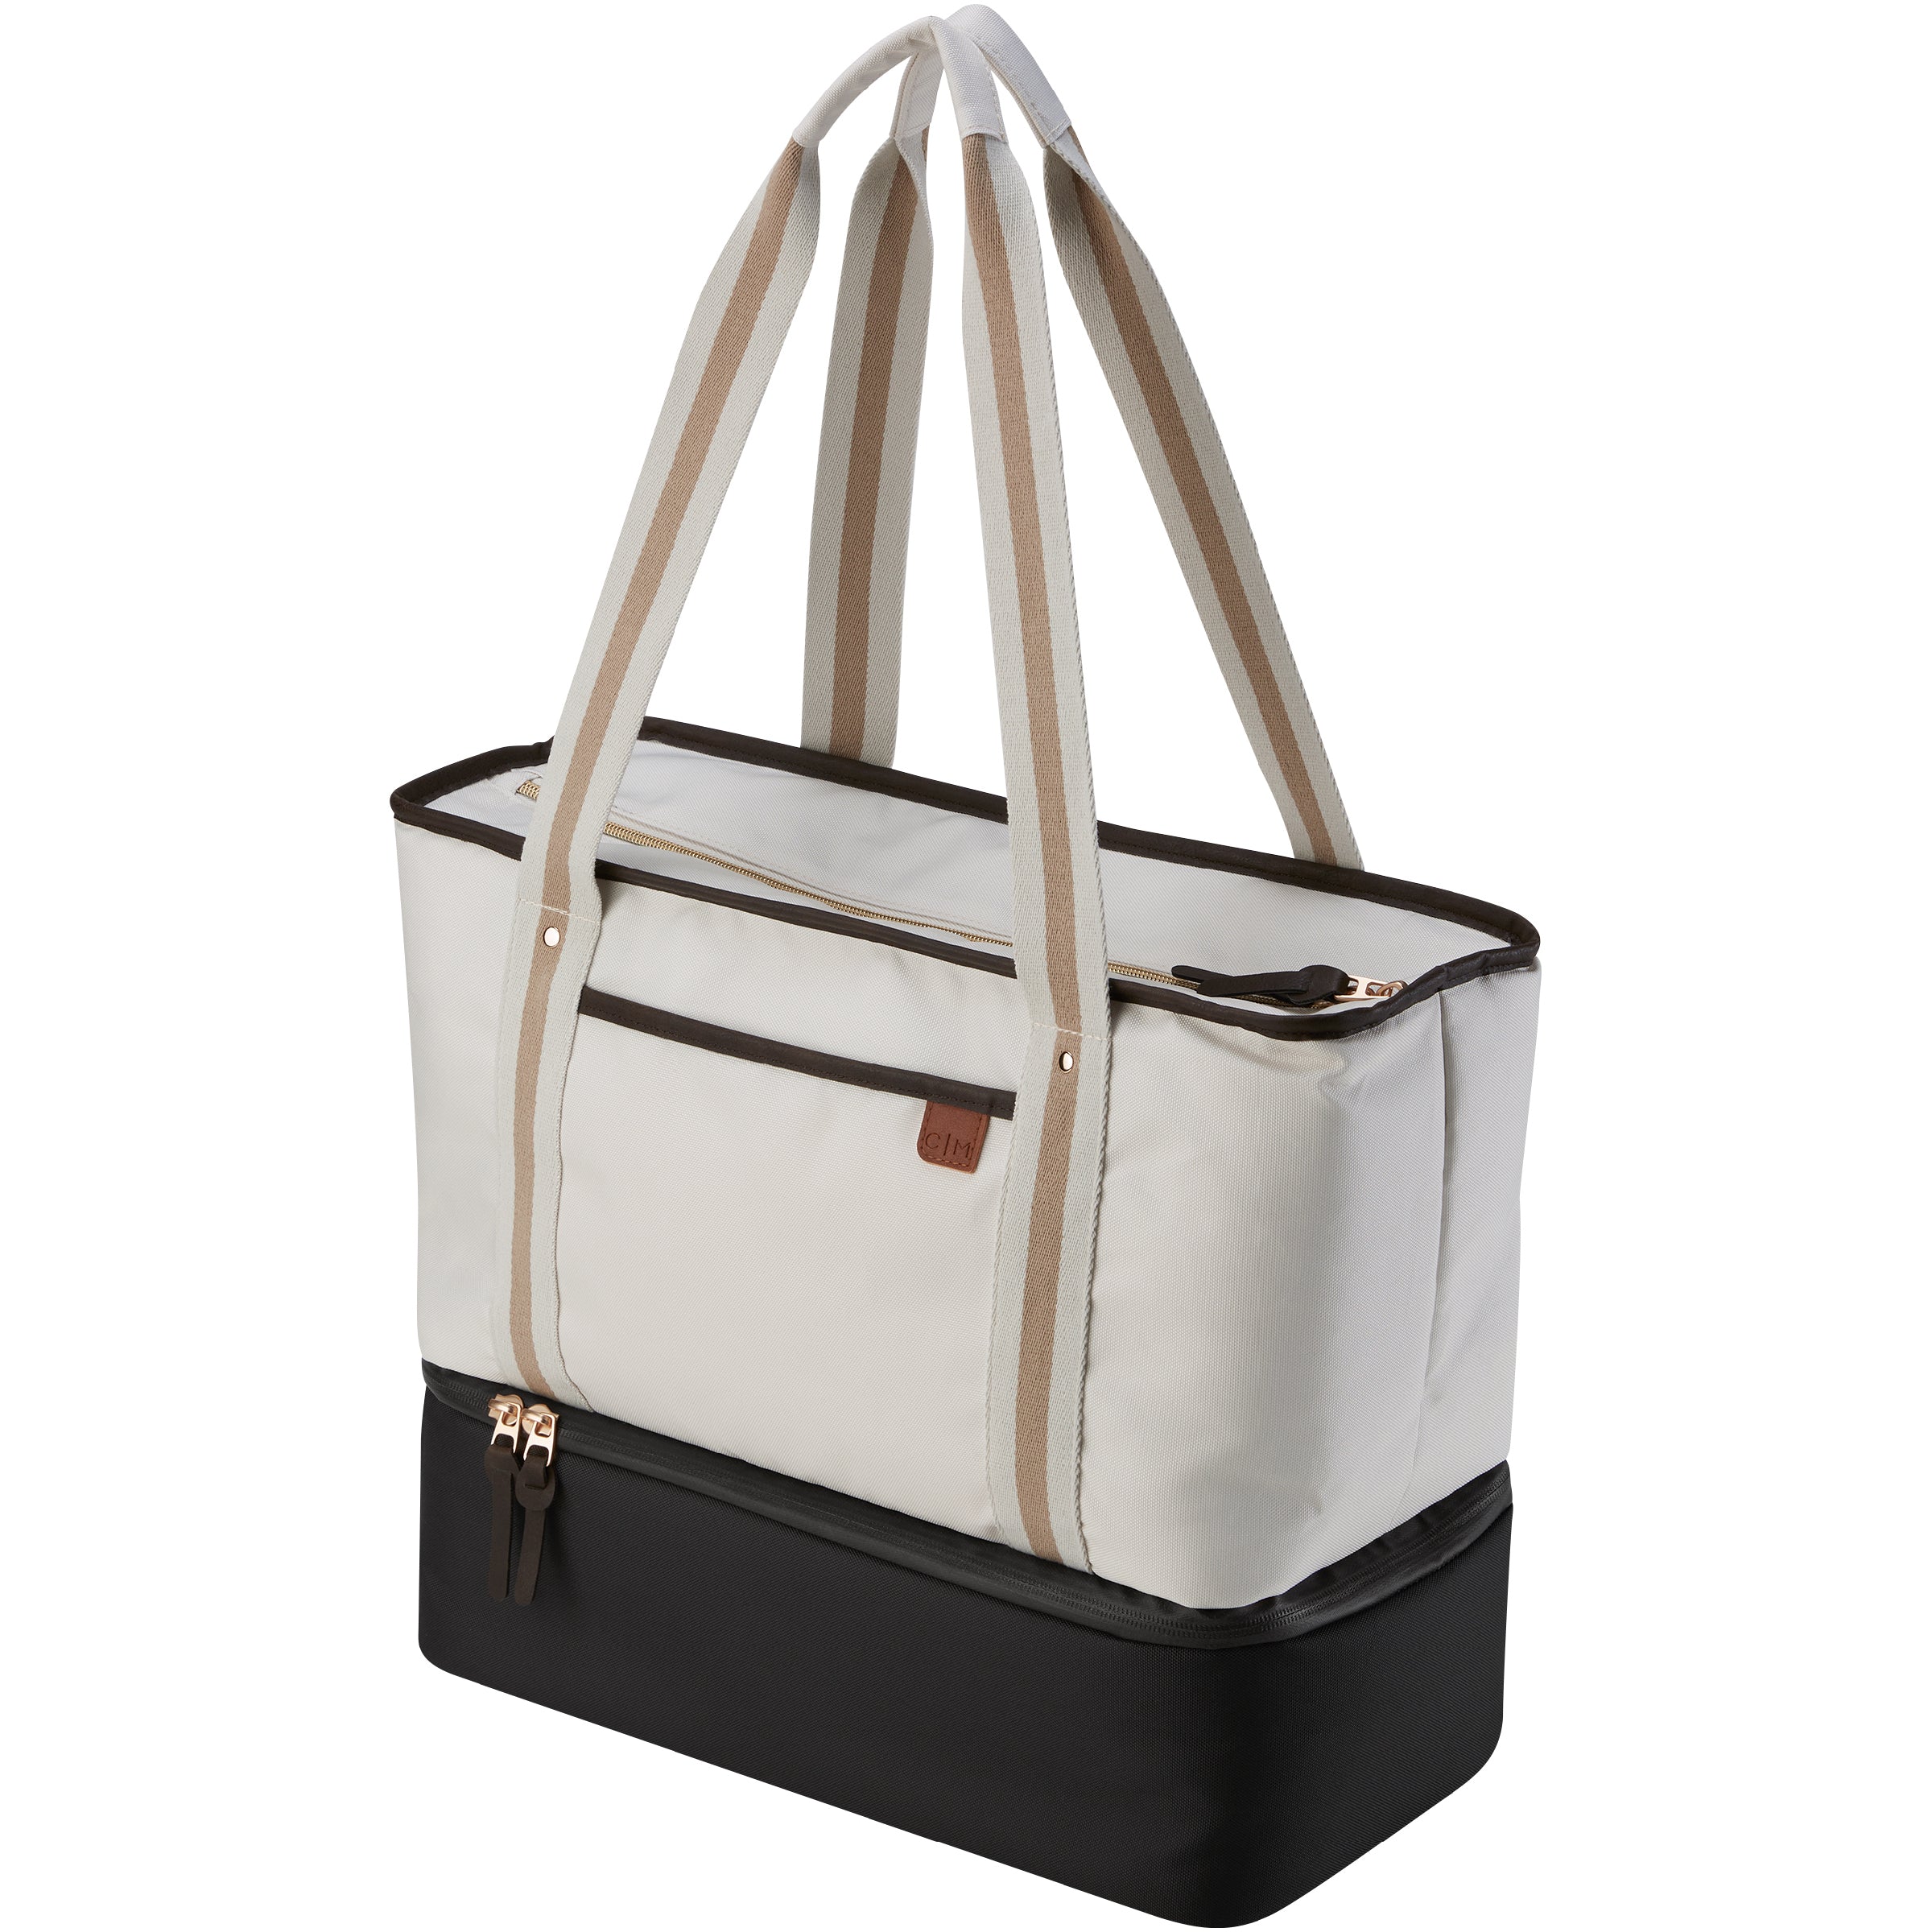 Clevermade Premium Soft Sided Malibu 9qt Cooler Tote - Sand & Sable